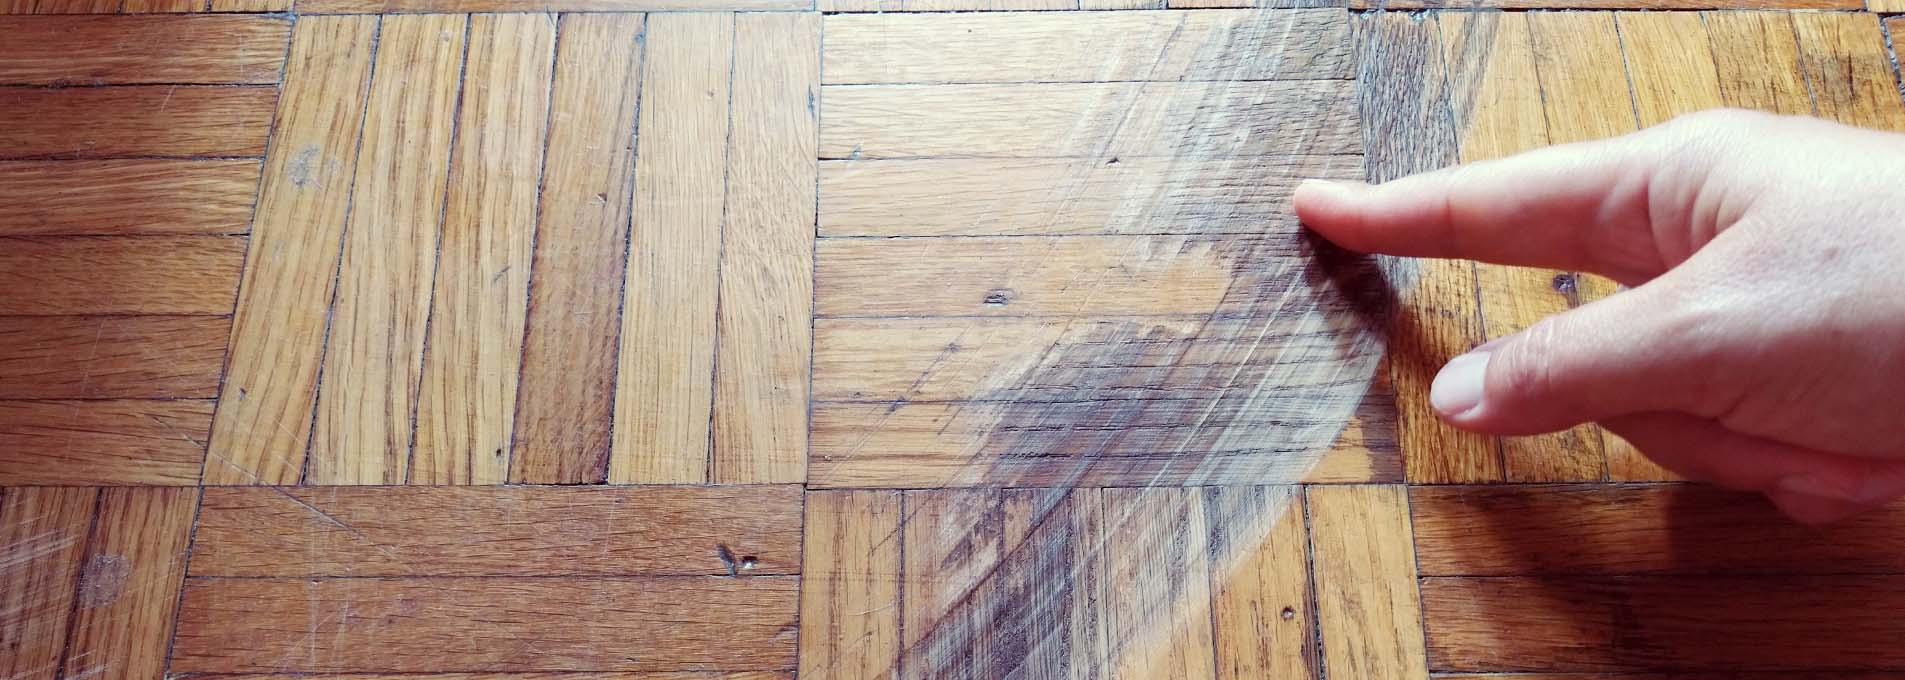 scratched wooden flooring